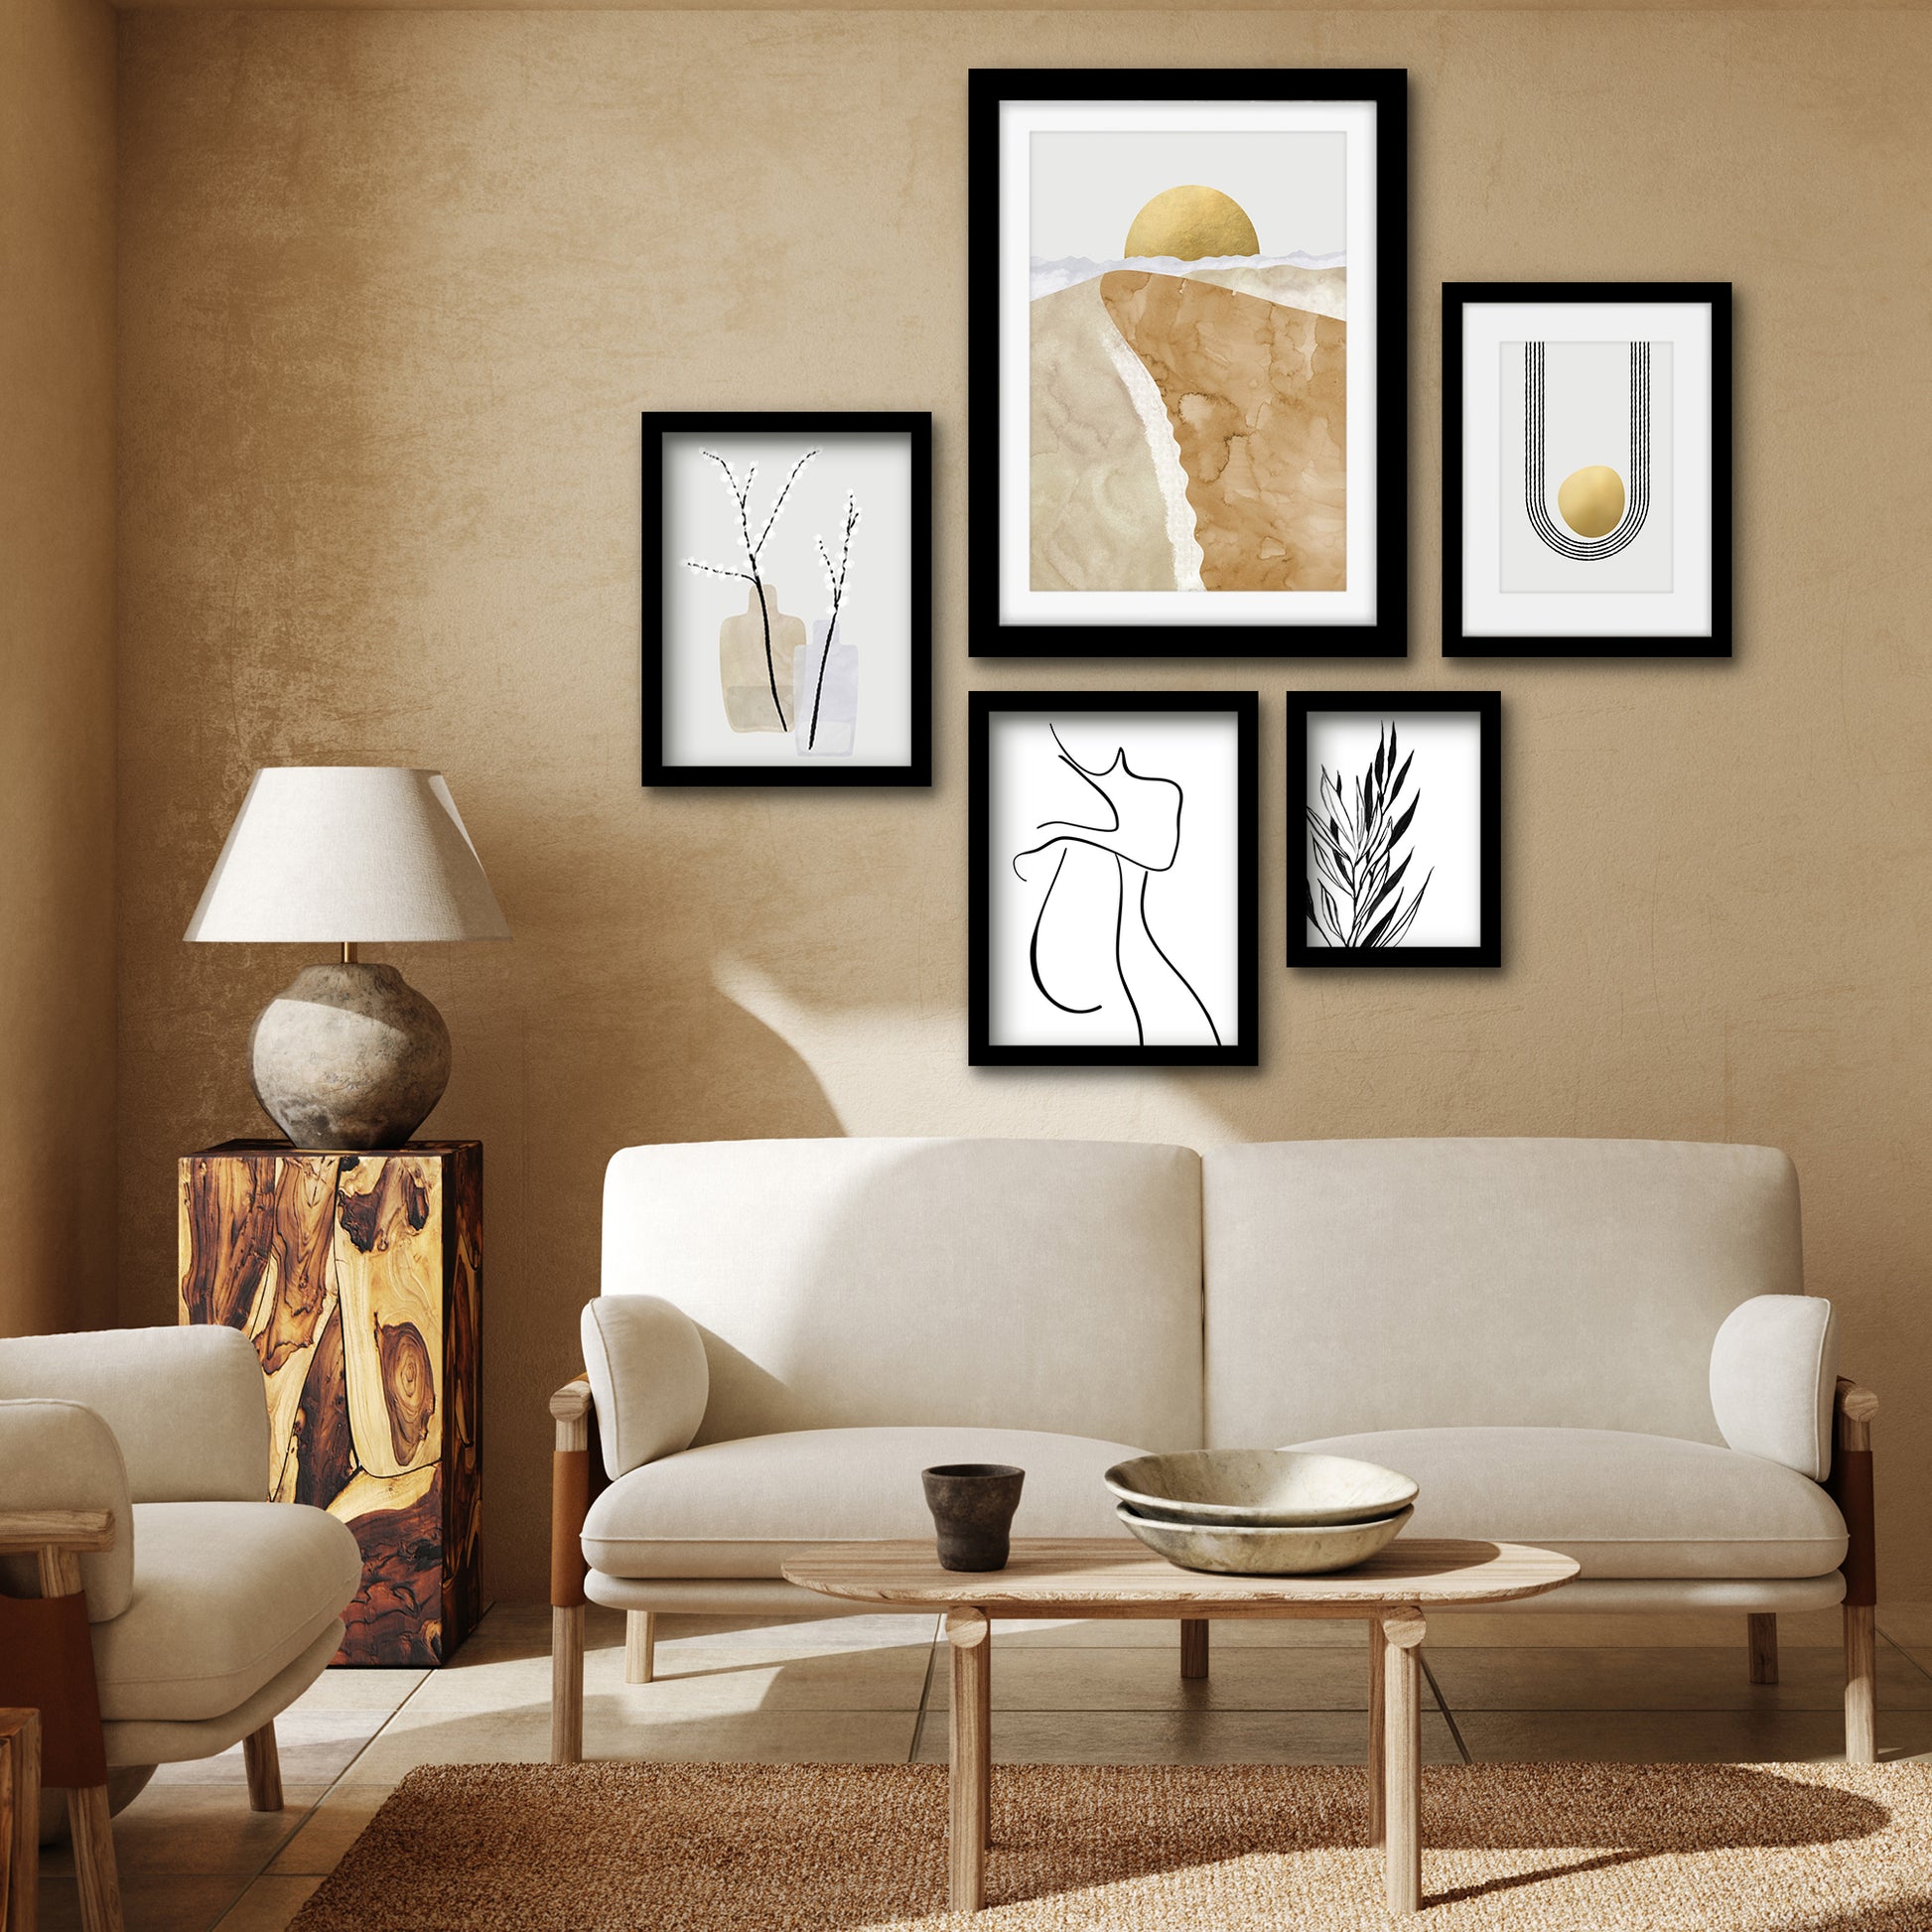 Americanflat 5 Piece Black Framed Gallery Wall Art Set - Black & Gold Abstract Floral Shapes